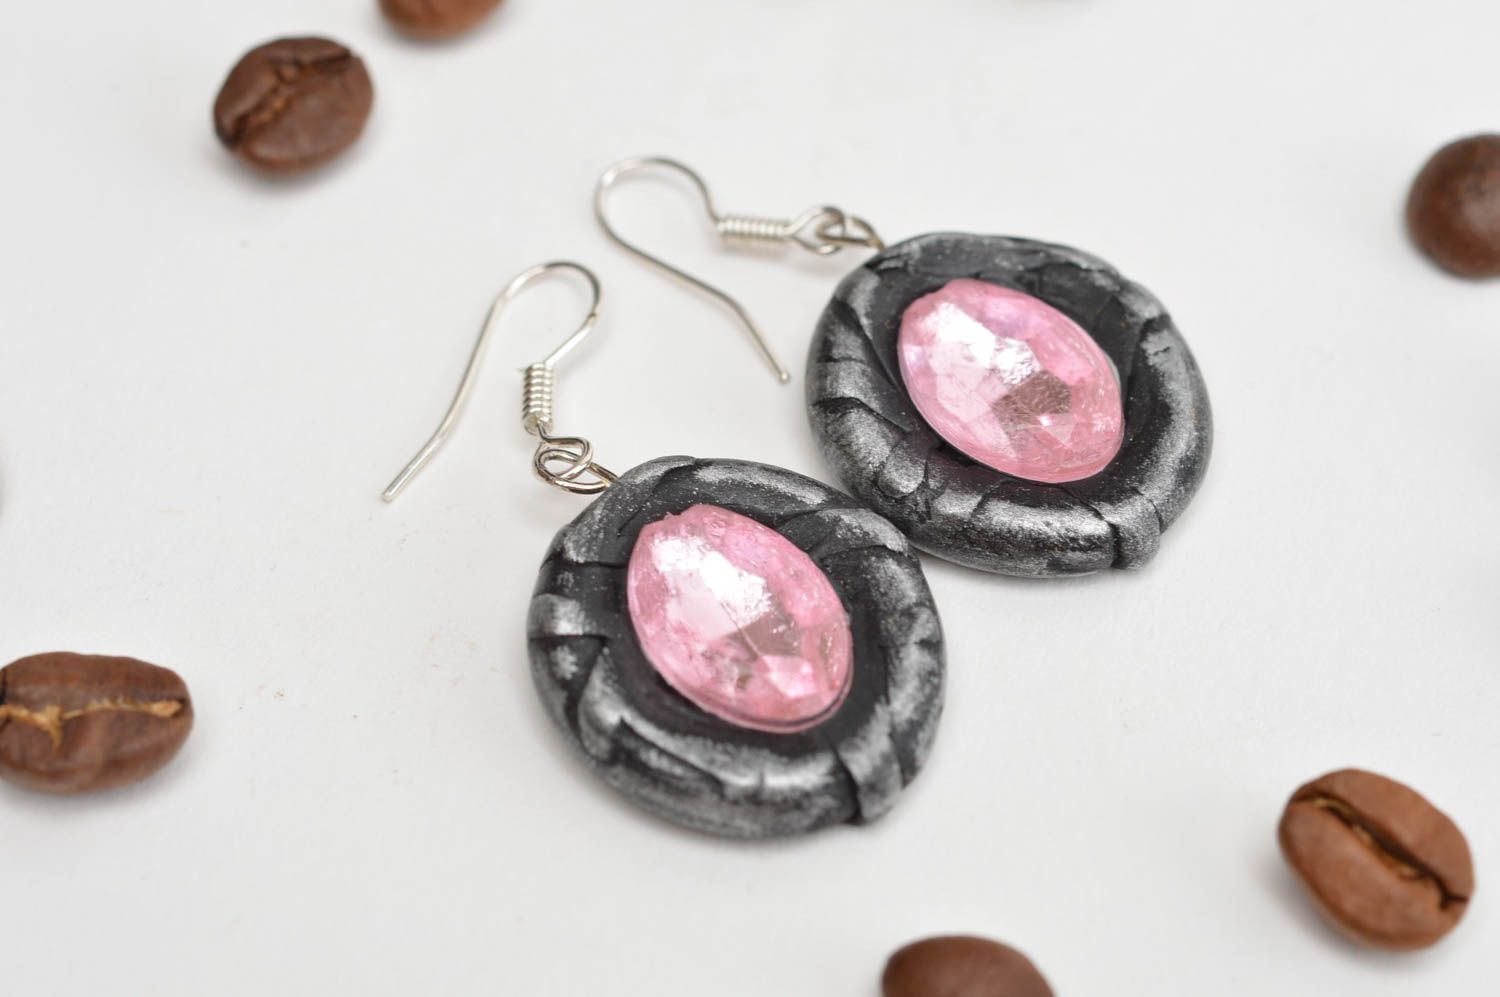 Stylish handmade plastic earrings elegant evening jewelry gifts for her photo 1